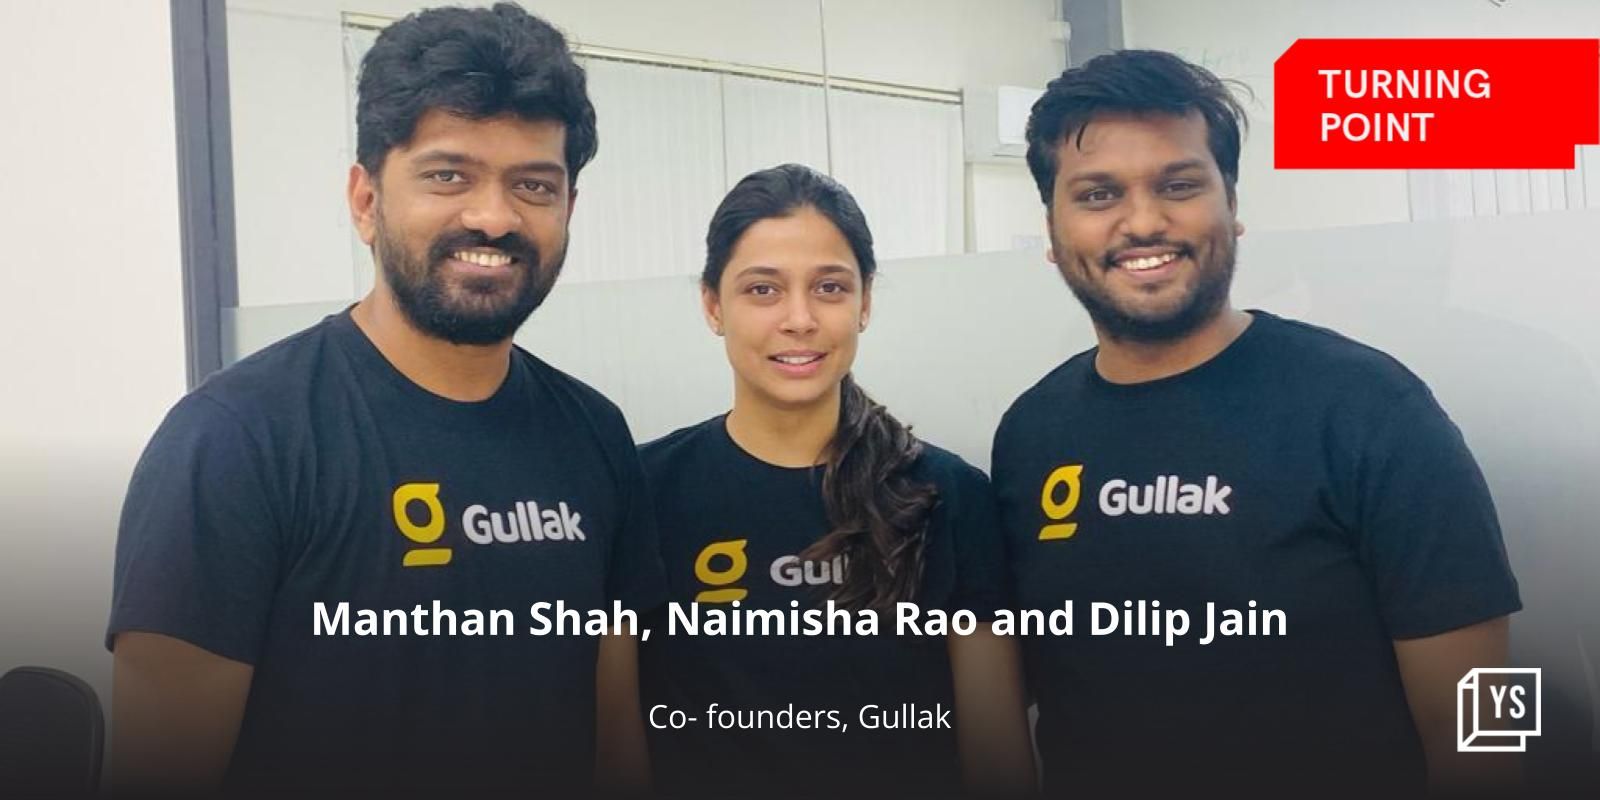 These founders launched gold savings app to help people save and invest easily